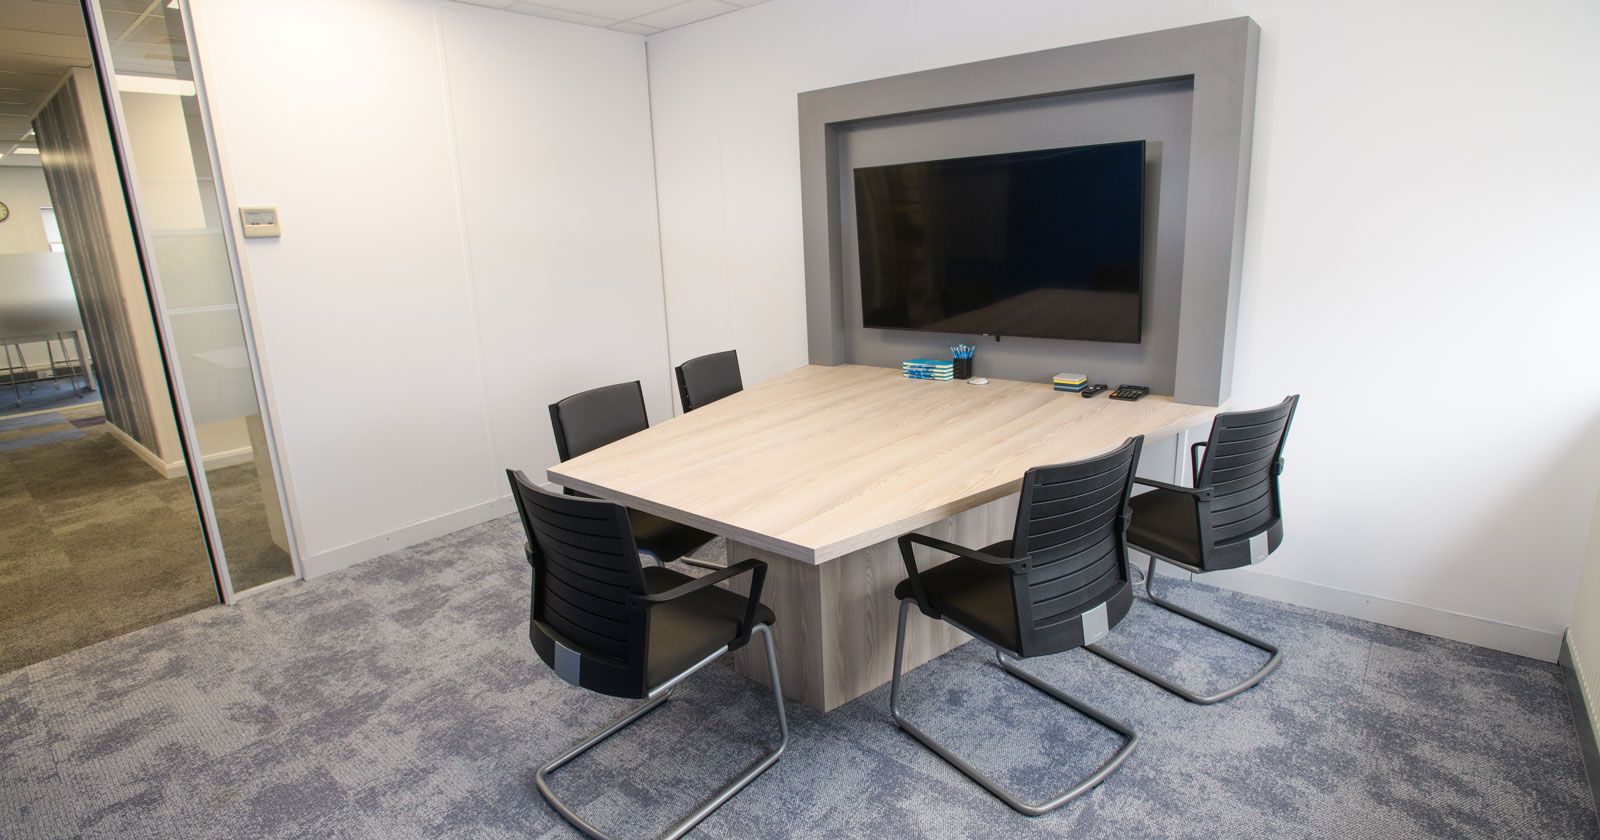 Charnwood-Accountants-Meeting-desk-and-media-wall-surround-designed-built-and-installed--by-APSS-Joinery